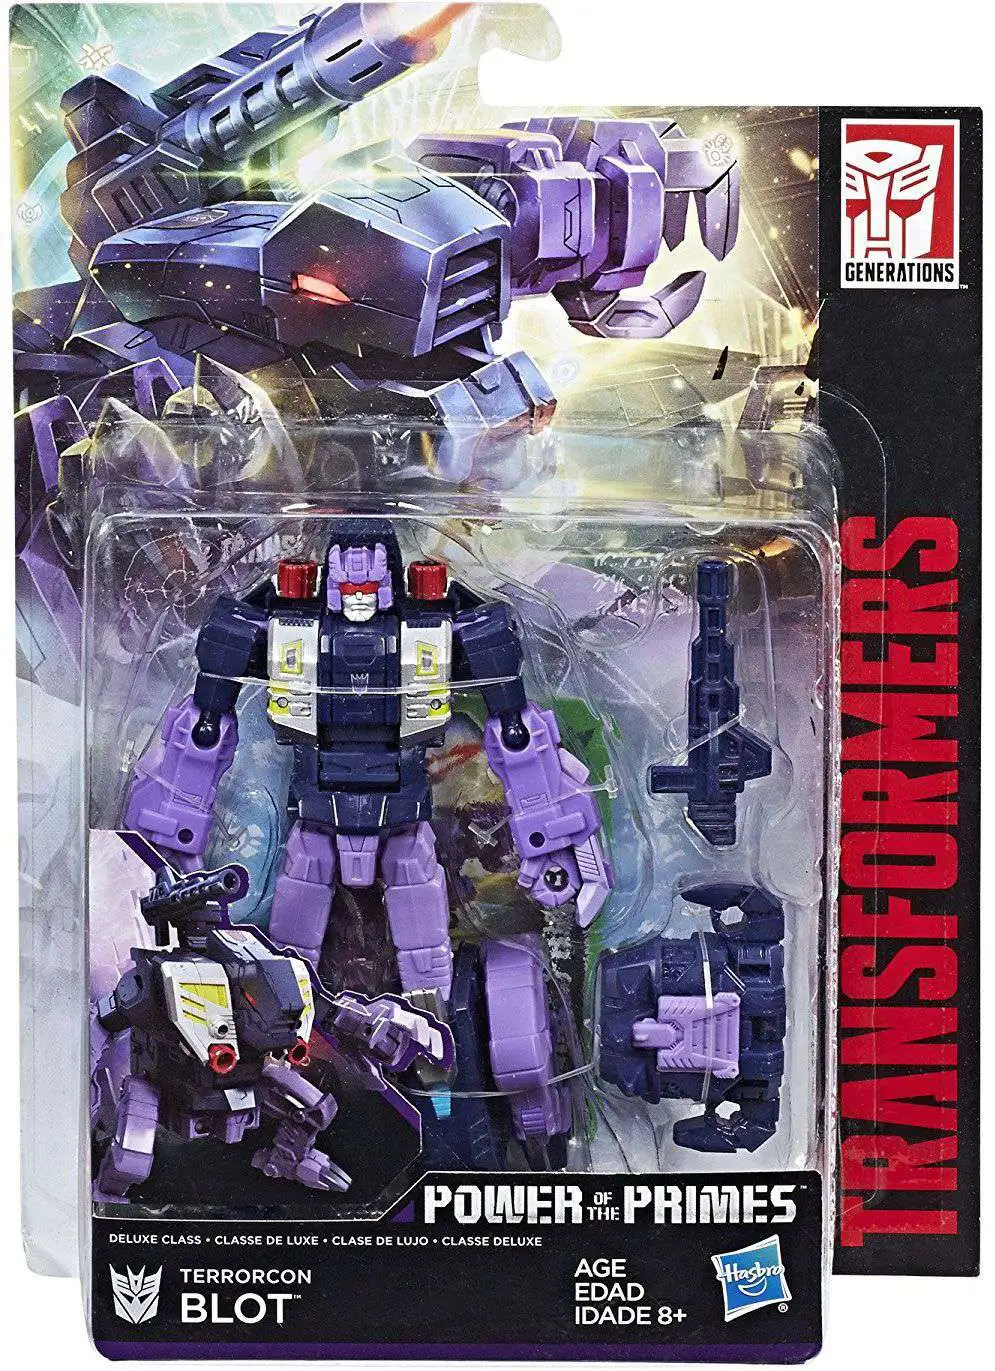 Transformers Generations Power of the Primes Deluxe Class Terrorcon Blot 